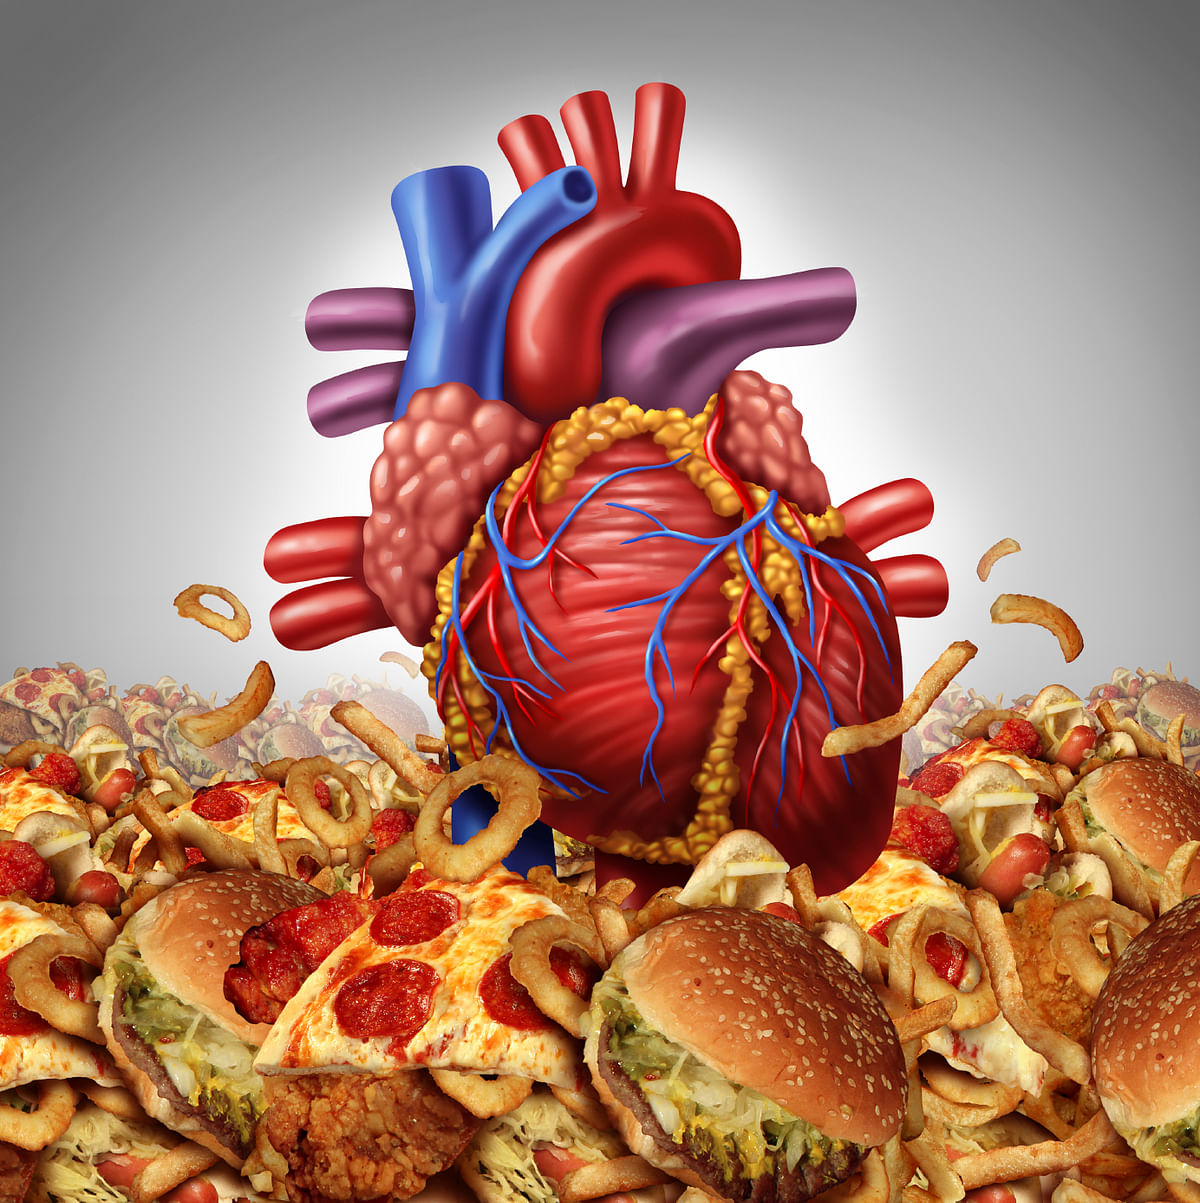 Turns out good cholesterol can sometimes be bad